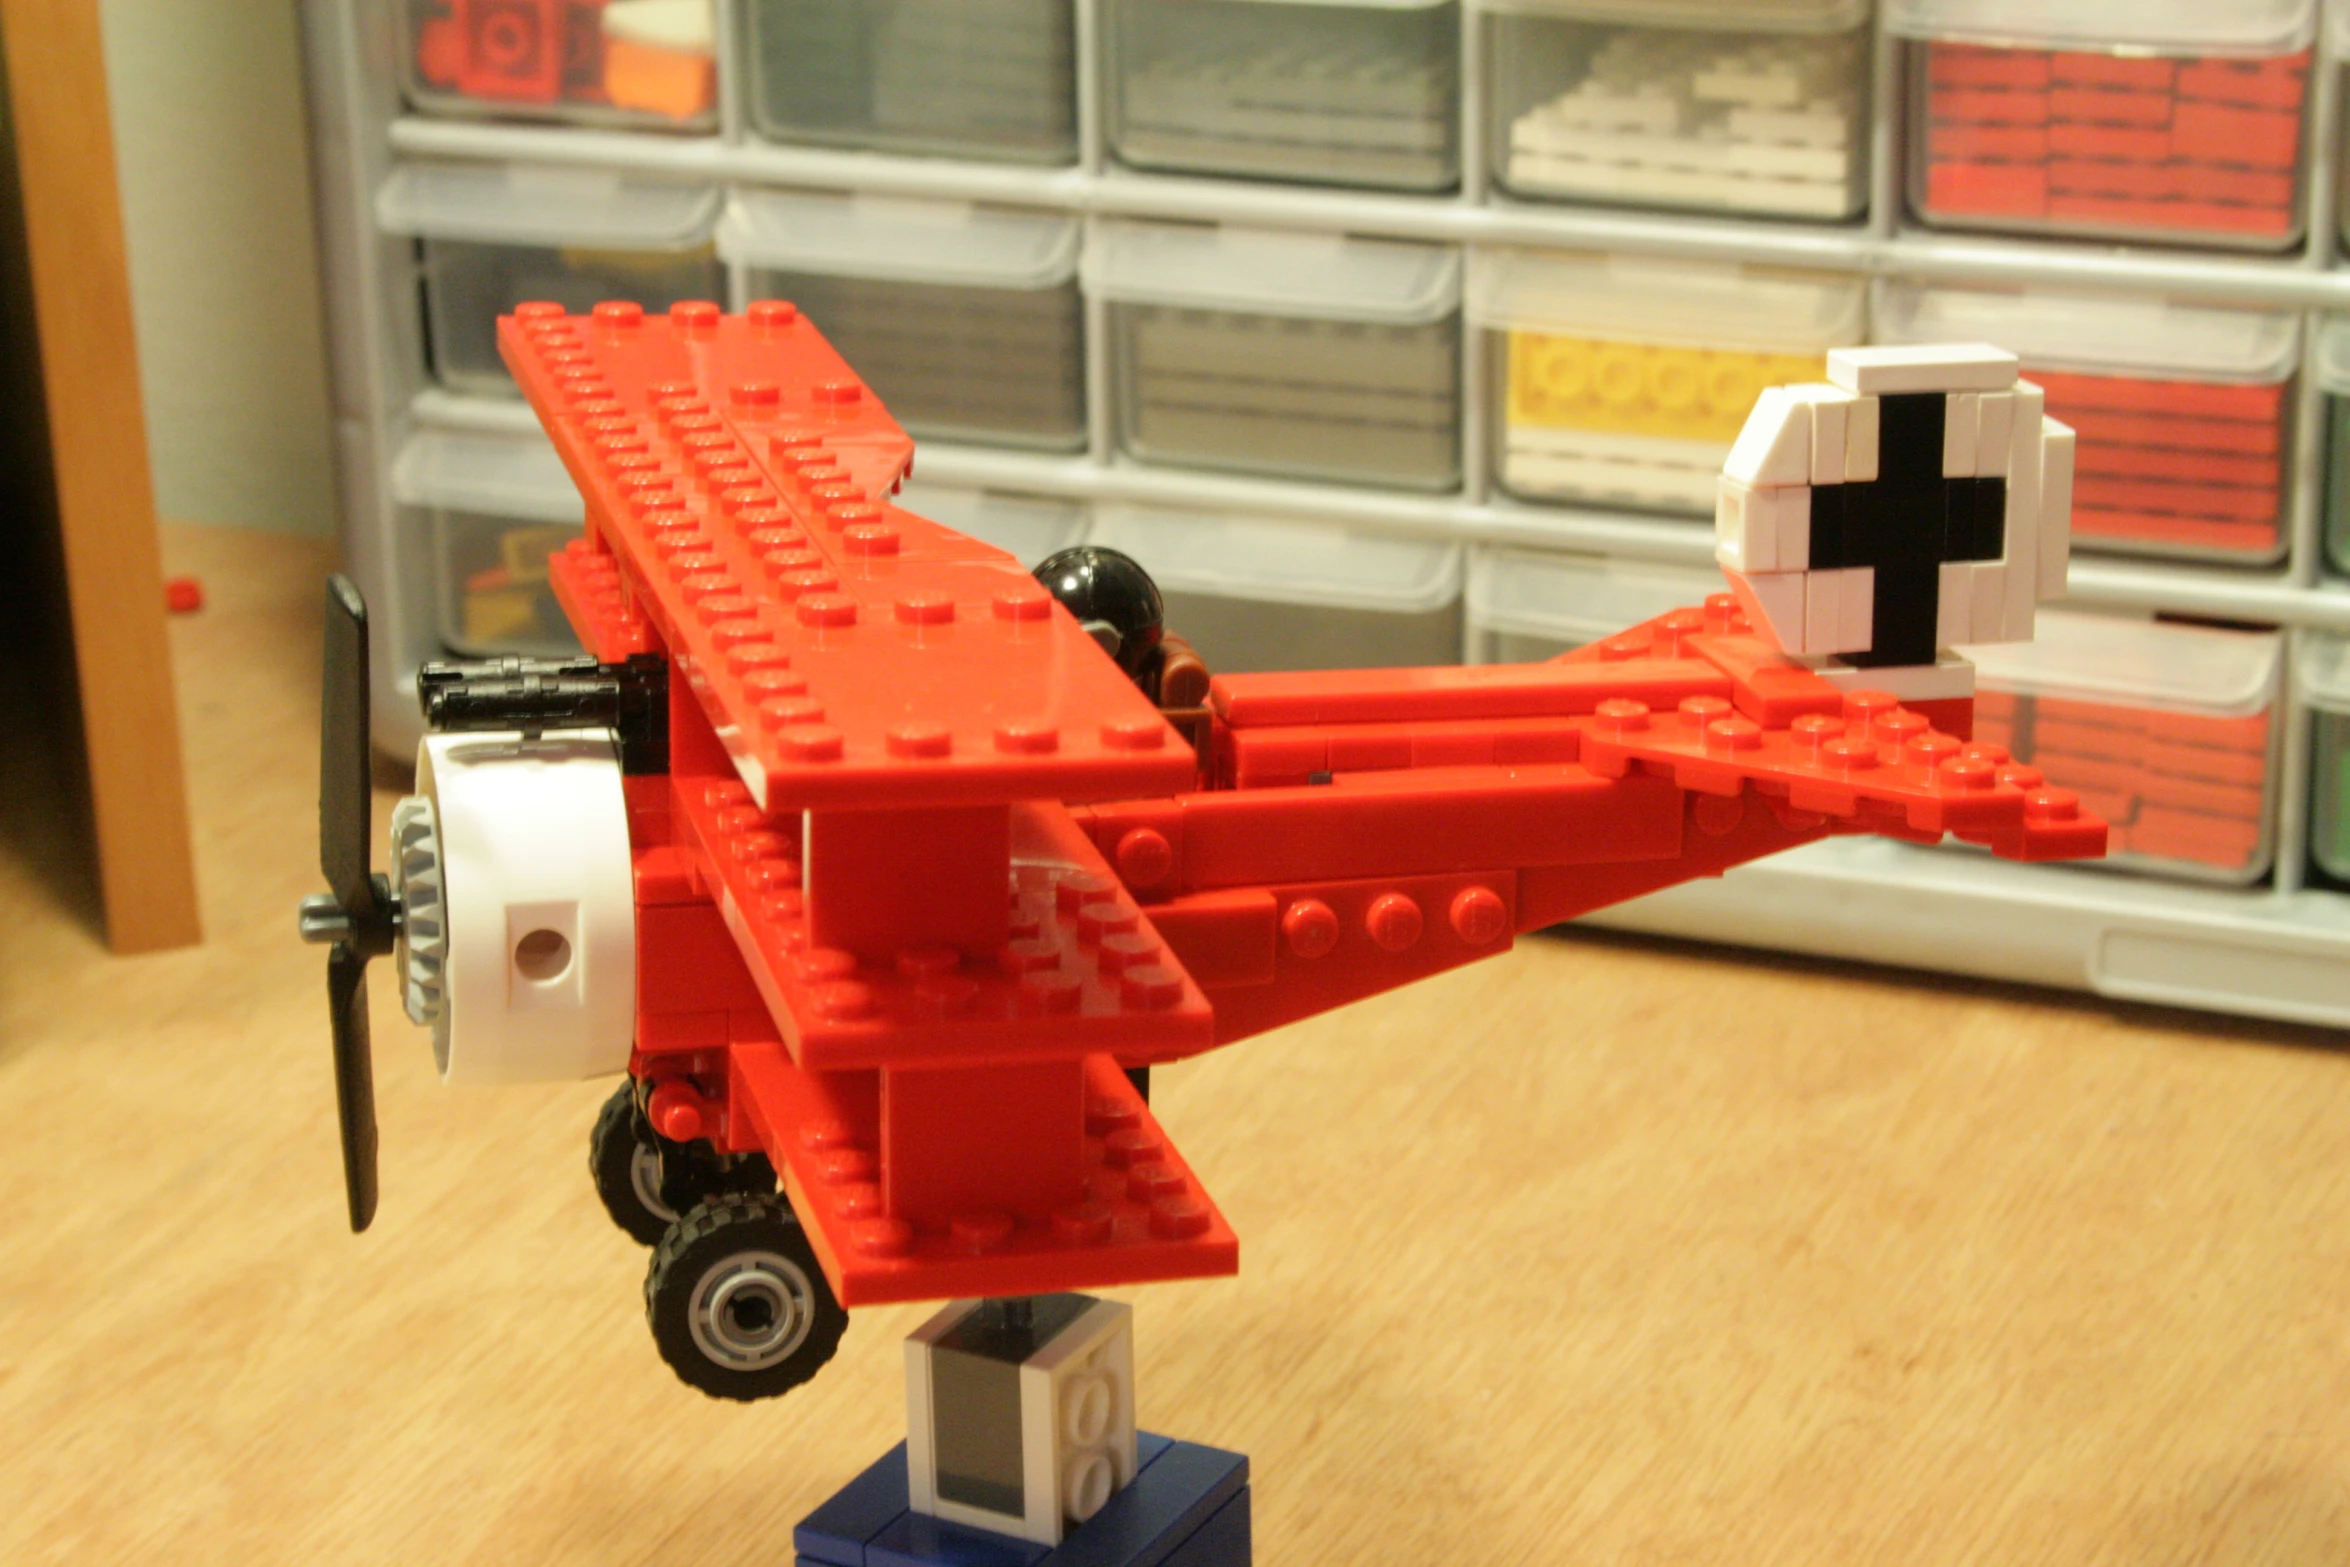 lego toy model red airplane on wooden floor